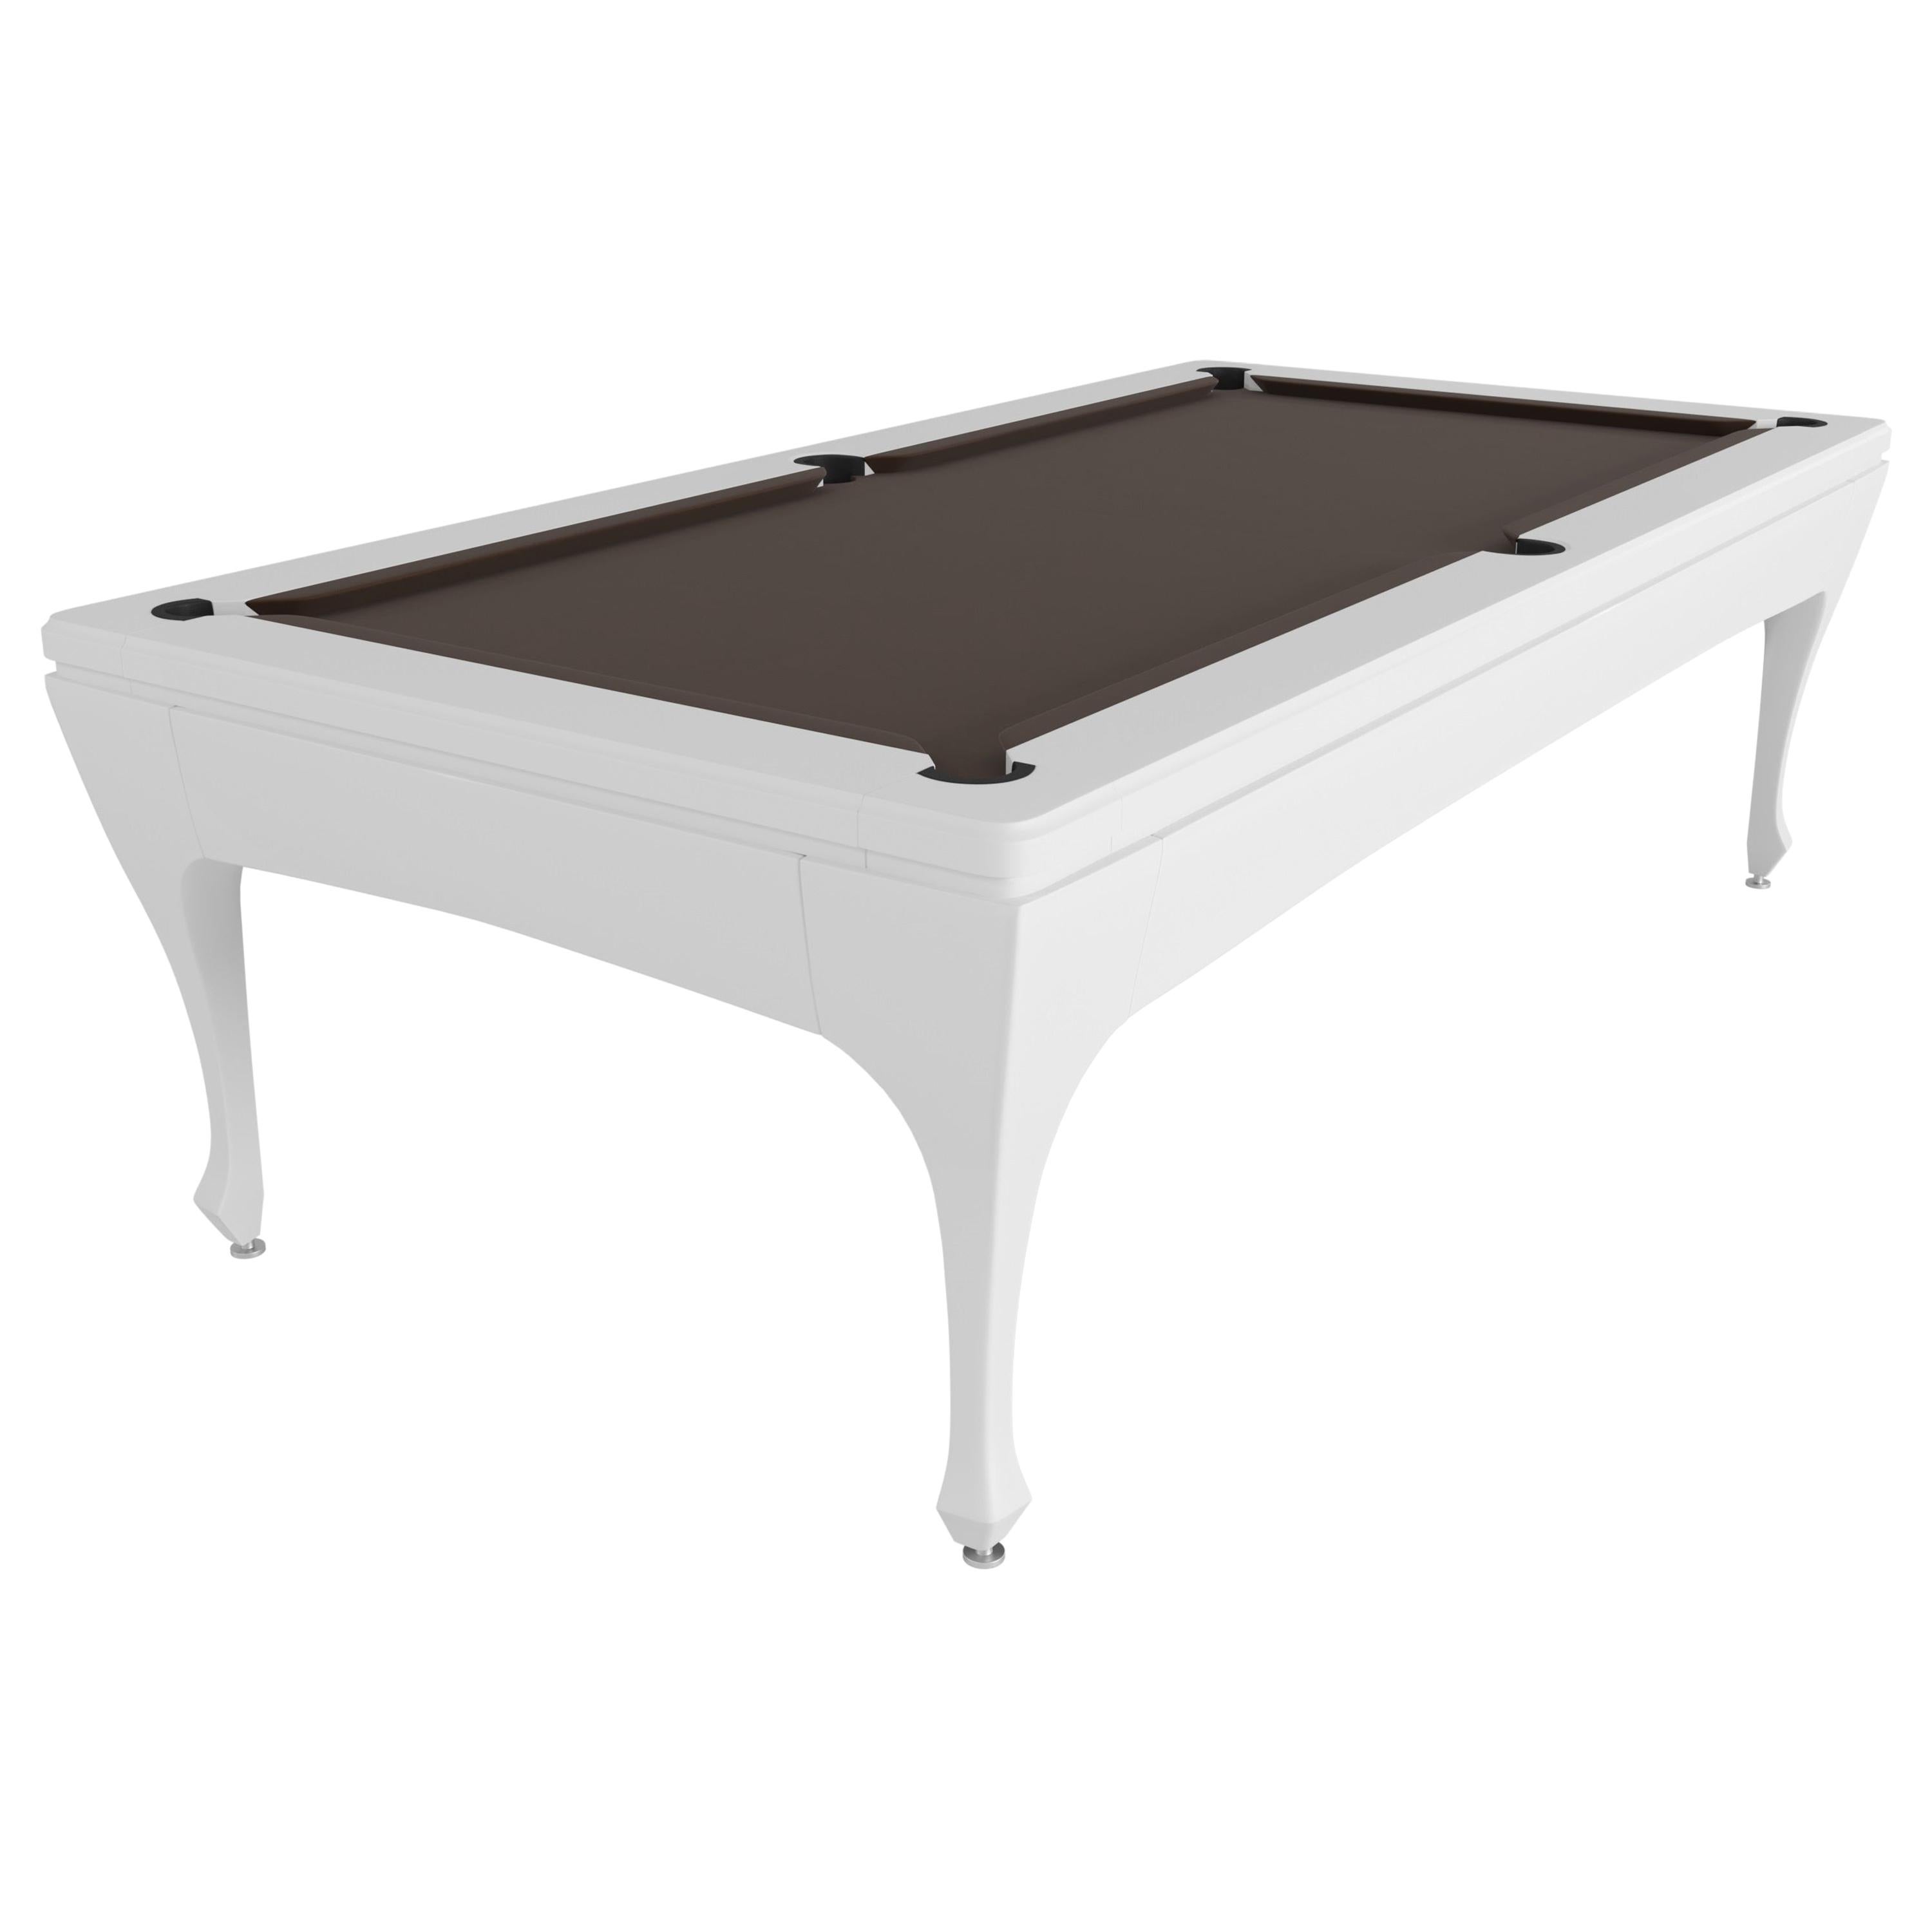 What is a bar billiards table?